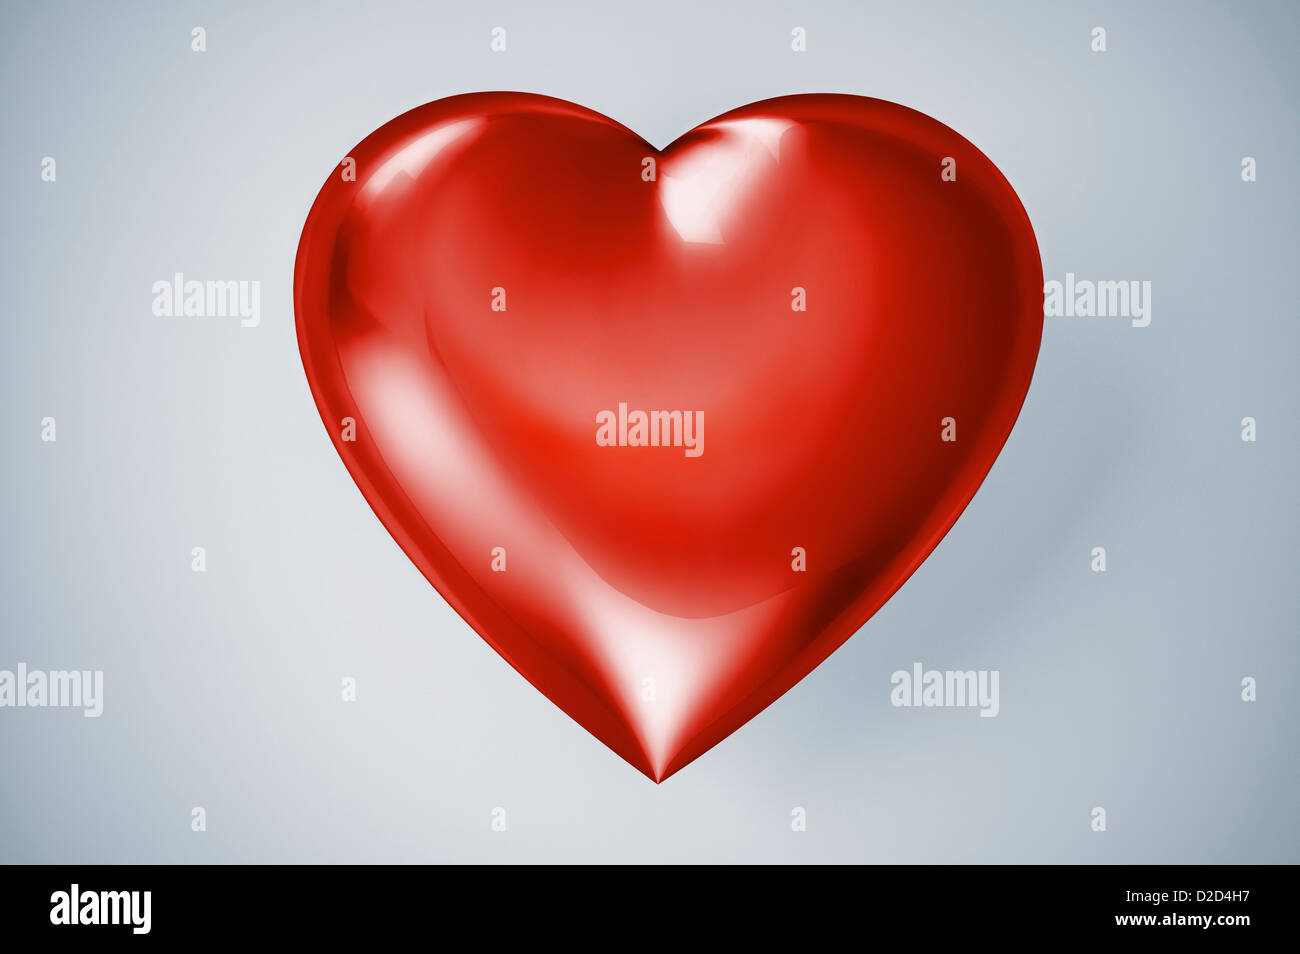 Red heart computer artwork Stock Photo